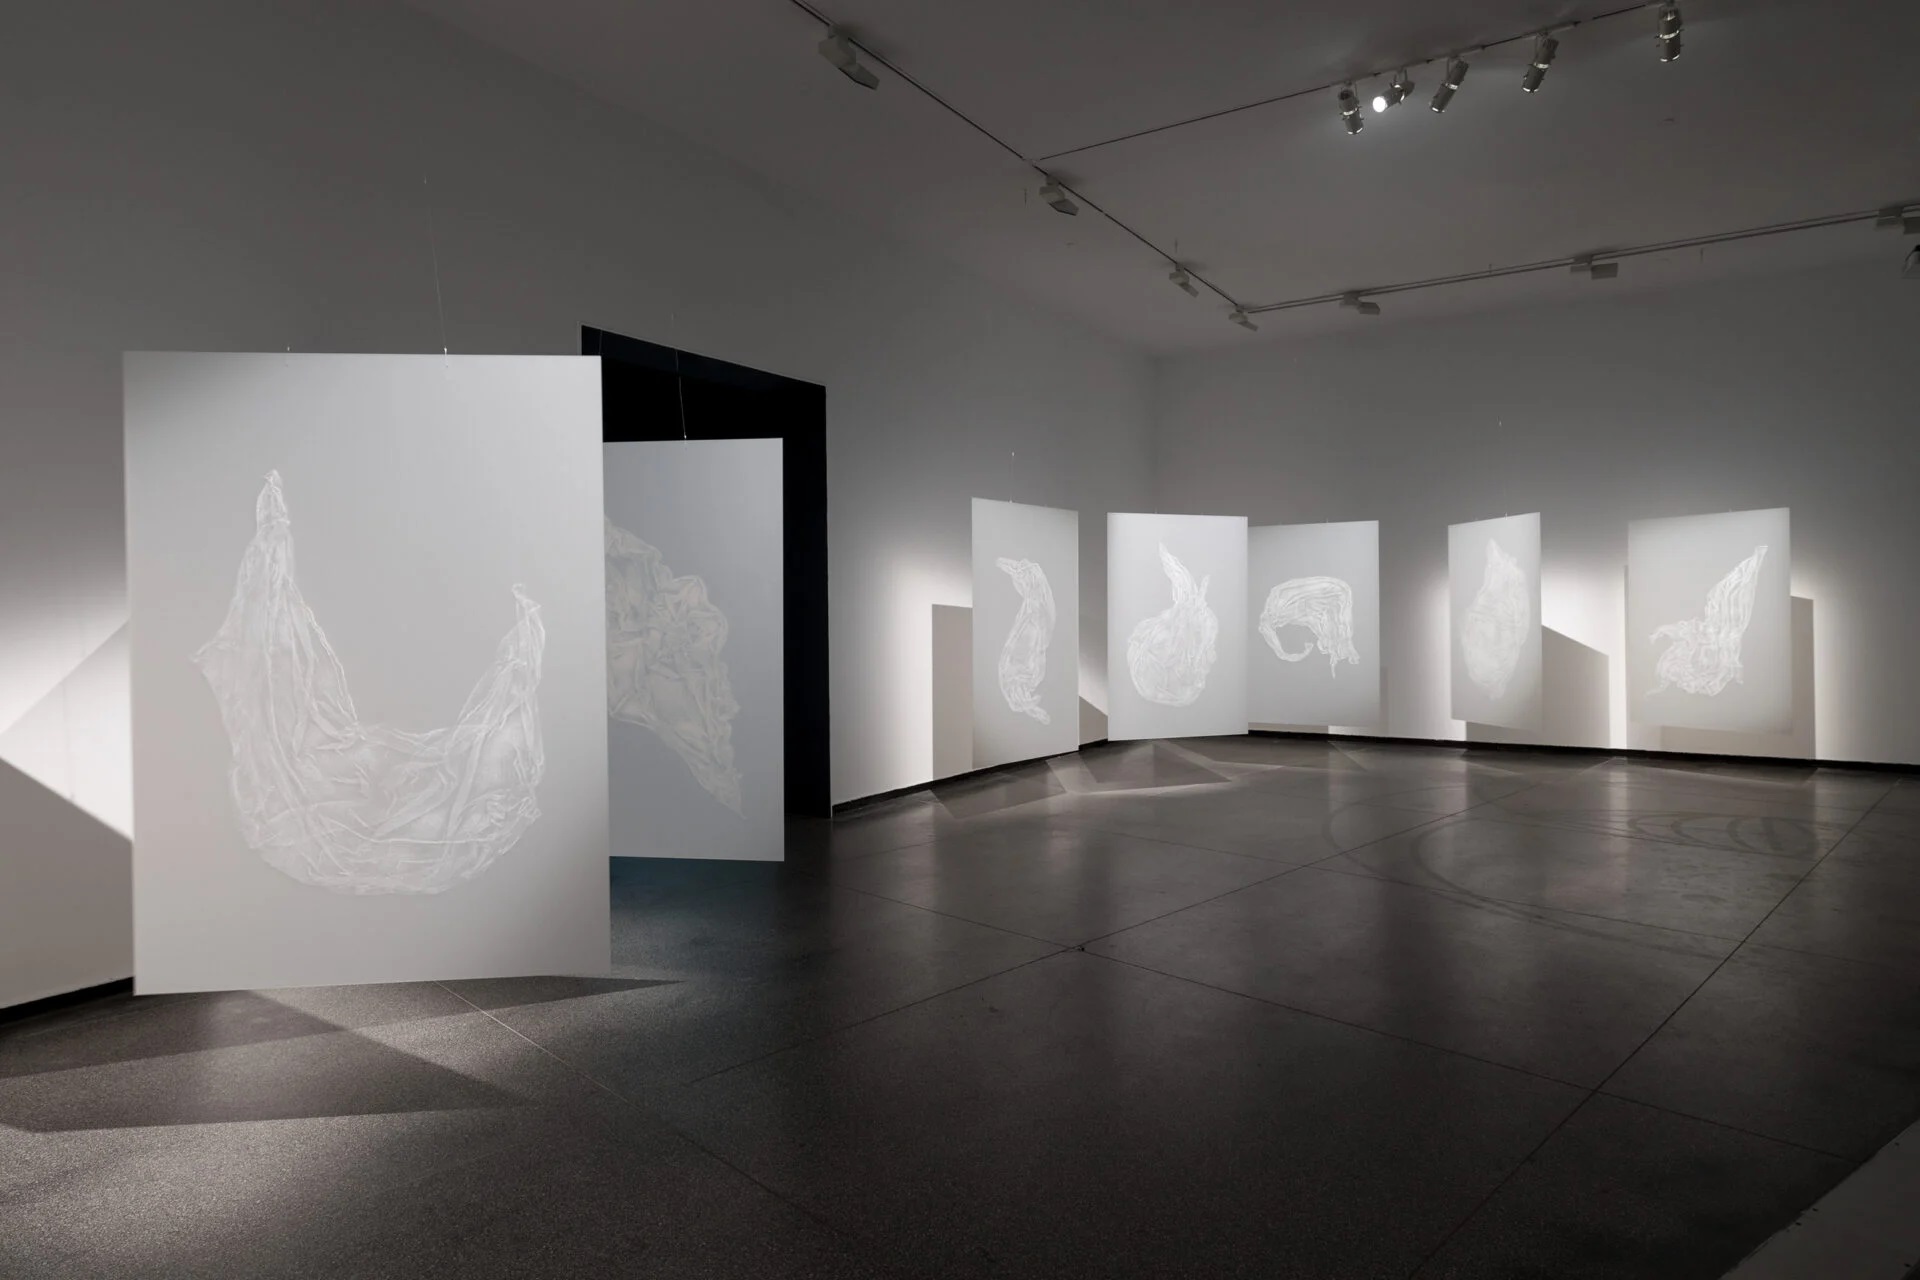 Image Description: Seven grey acrylic panels with white images of floating fabric are suspended from the ceiling at different angles. Two appear in the foreground, with five grouped together in the background. Displayed in a gallery with white walls and a grey tiled floor. 